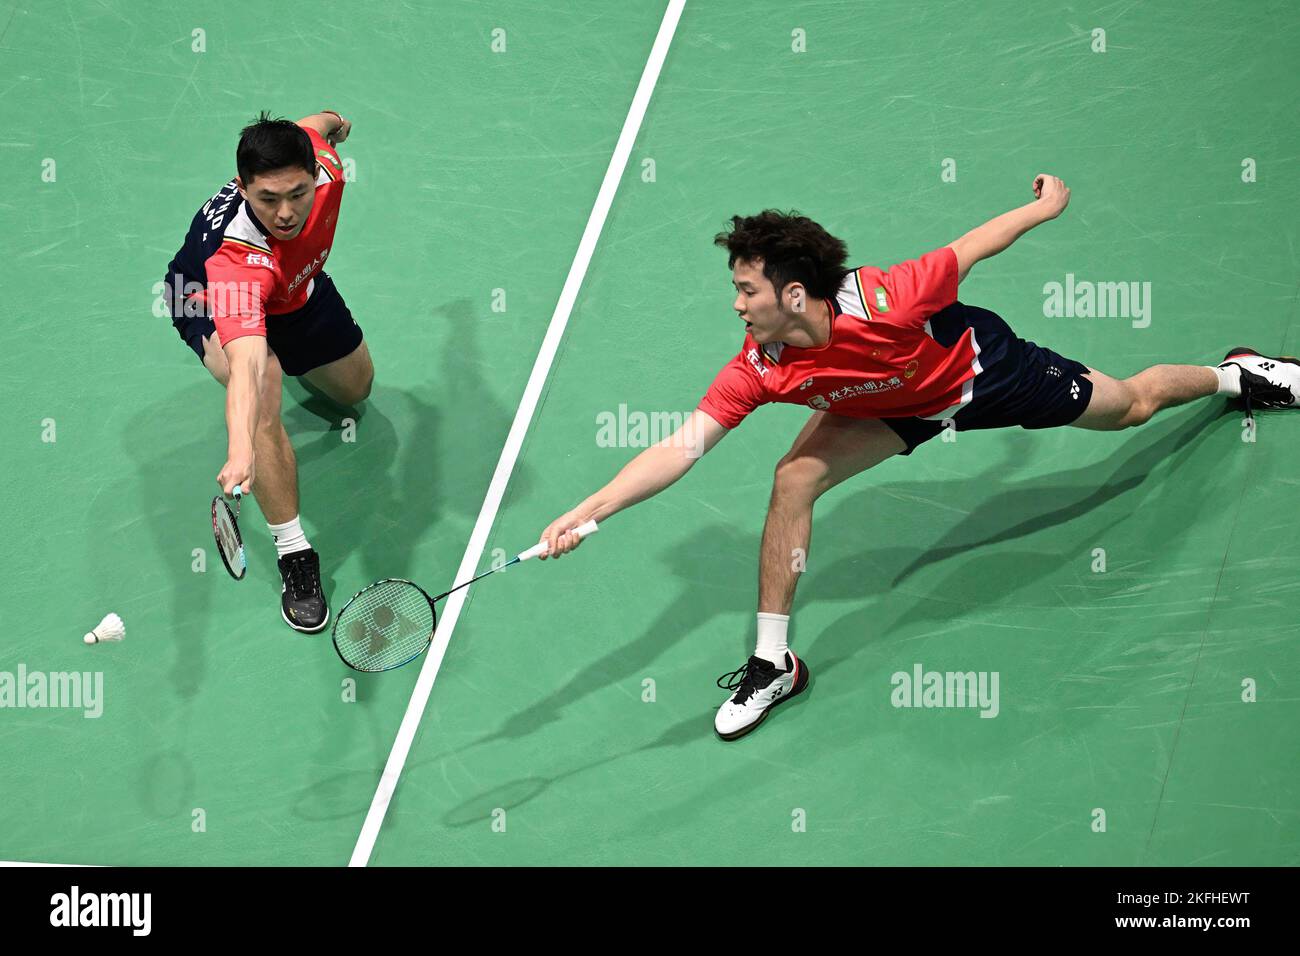 Sydney, Australia. 18th Nov, 2022. Zhou Hao Dong (L) and He Ji Ting (R) of China seen during the 2022 SATHIO GROUP Australian Badminton Open men's double quarter finals match against Liang Wei Keng and Wang Chang of China. Zhou and He won the match 21-19, 16-21, 21-17. (Photo by Luis Veniegra/SOPA Images/Sipa USA) Credit: Sipa USA/Alamy Live News Stock Photo